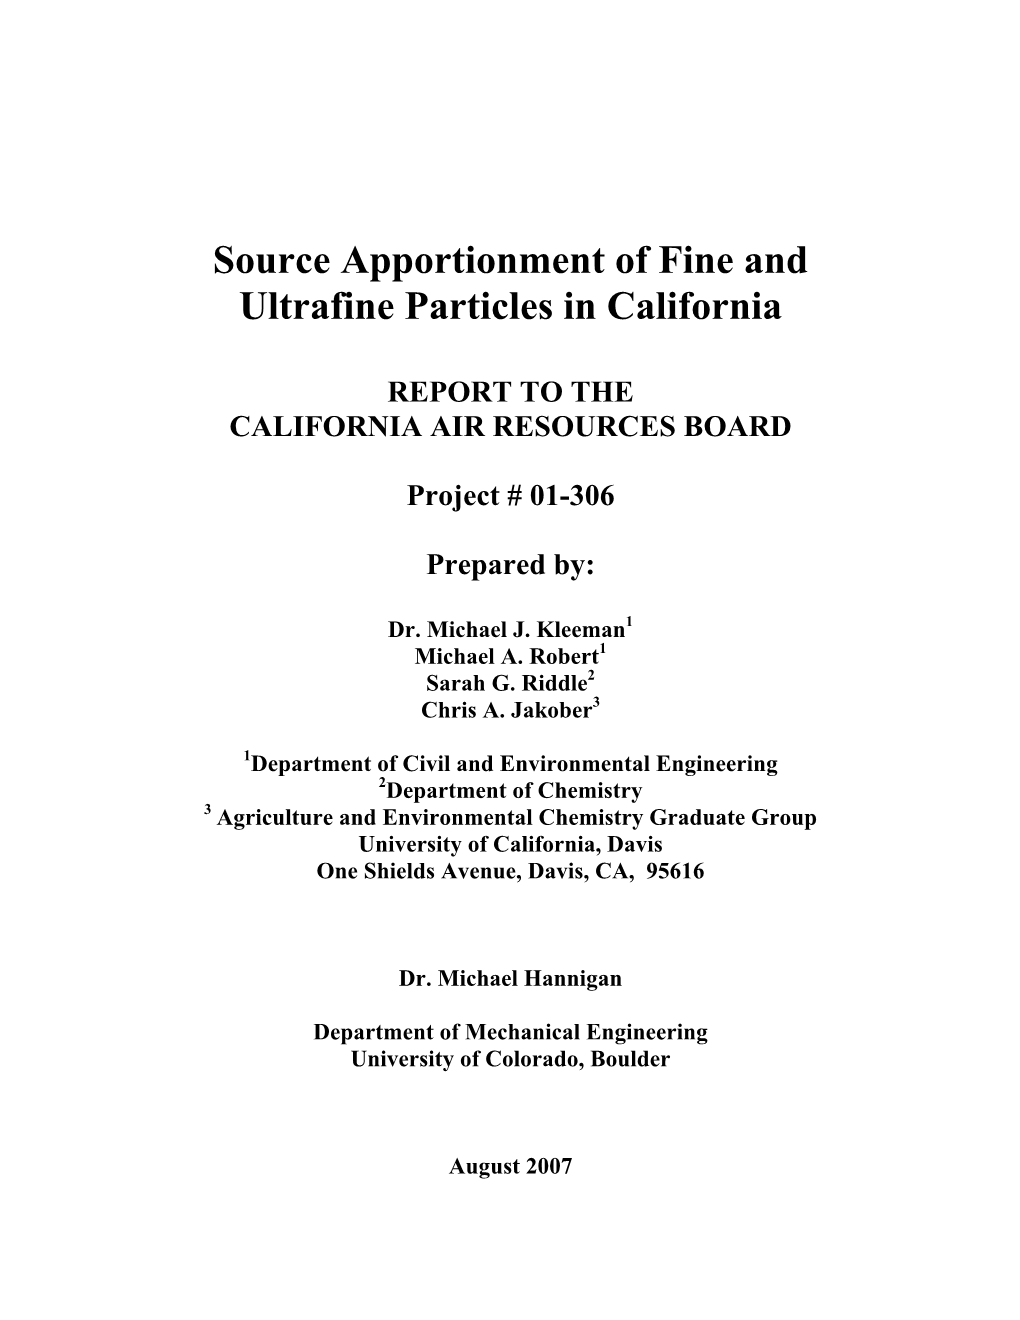 Source Apportionment of Fine and Ultrafine Particles in California. Final Report for Contract 01-306